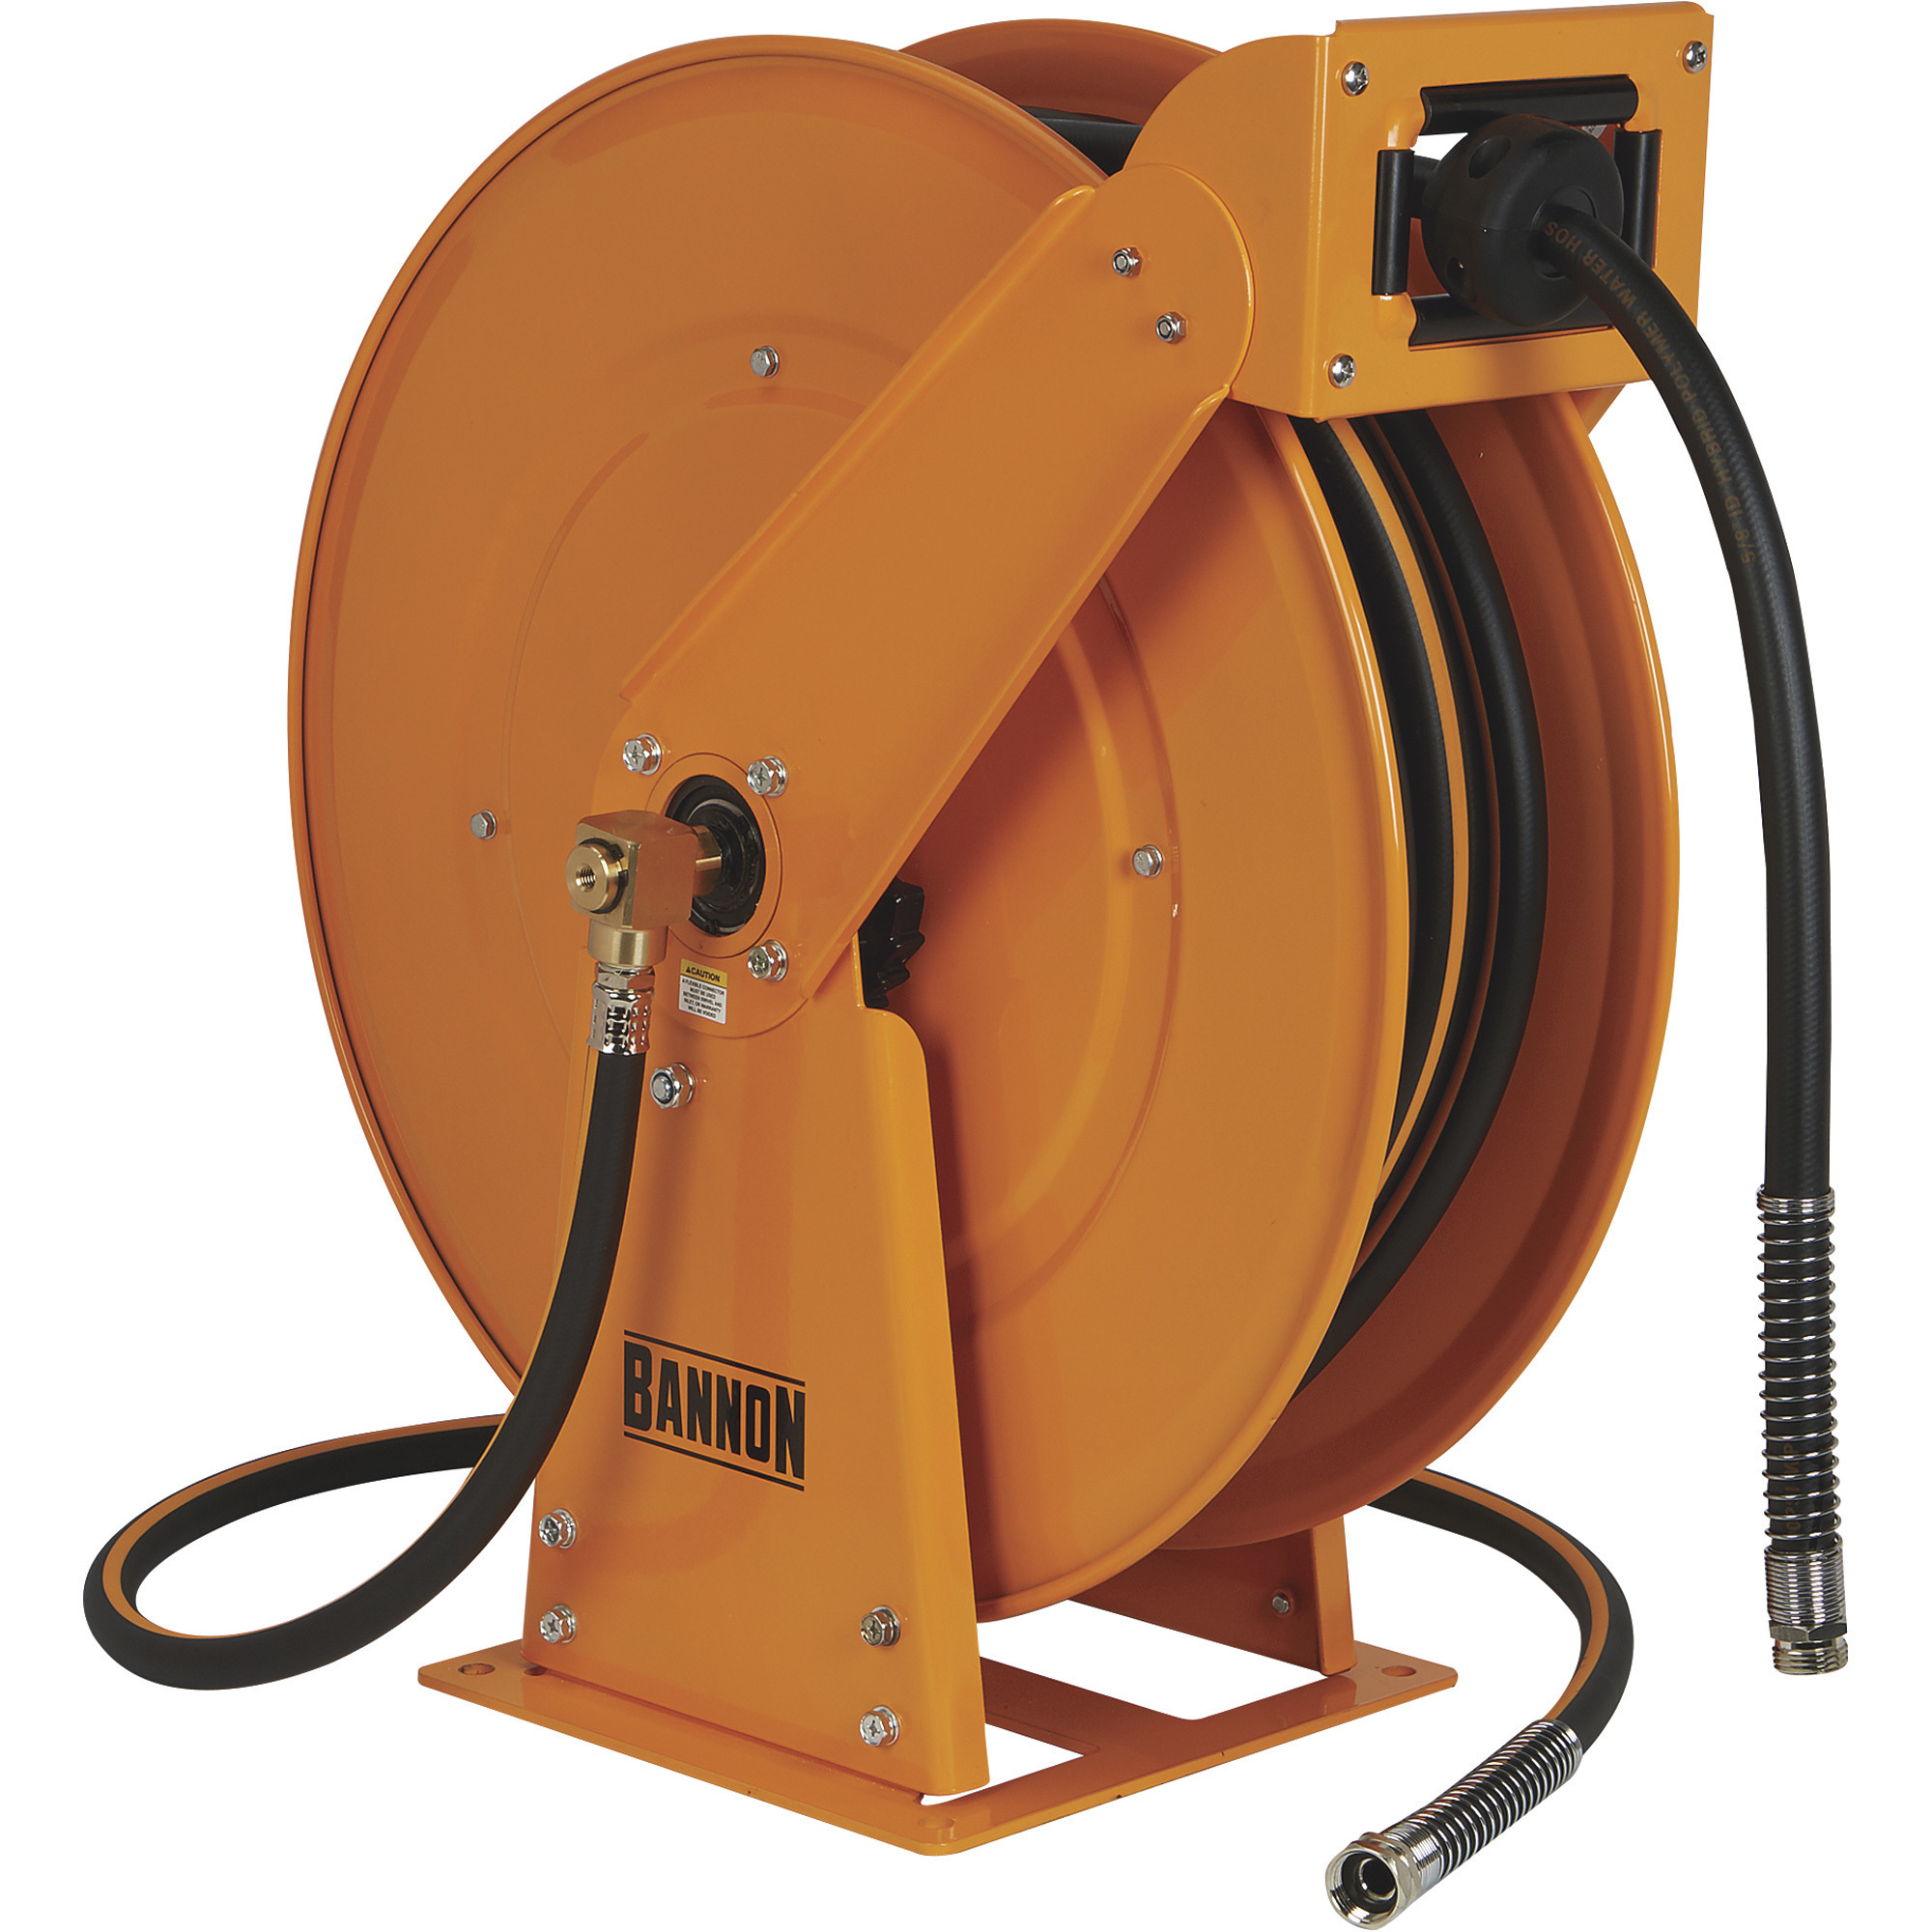 100 ft water hose in Air Hose Reel Online Shopping